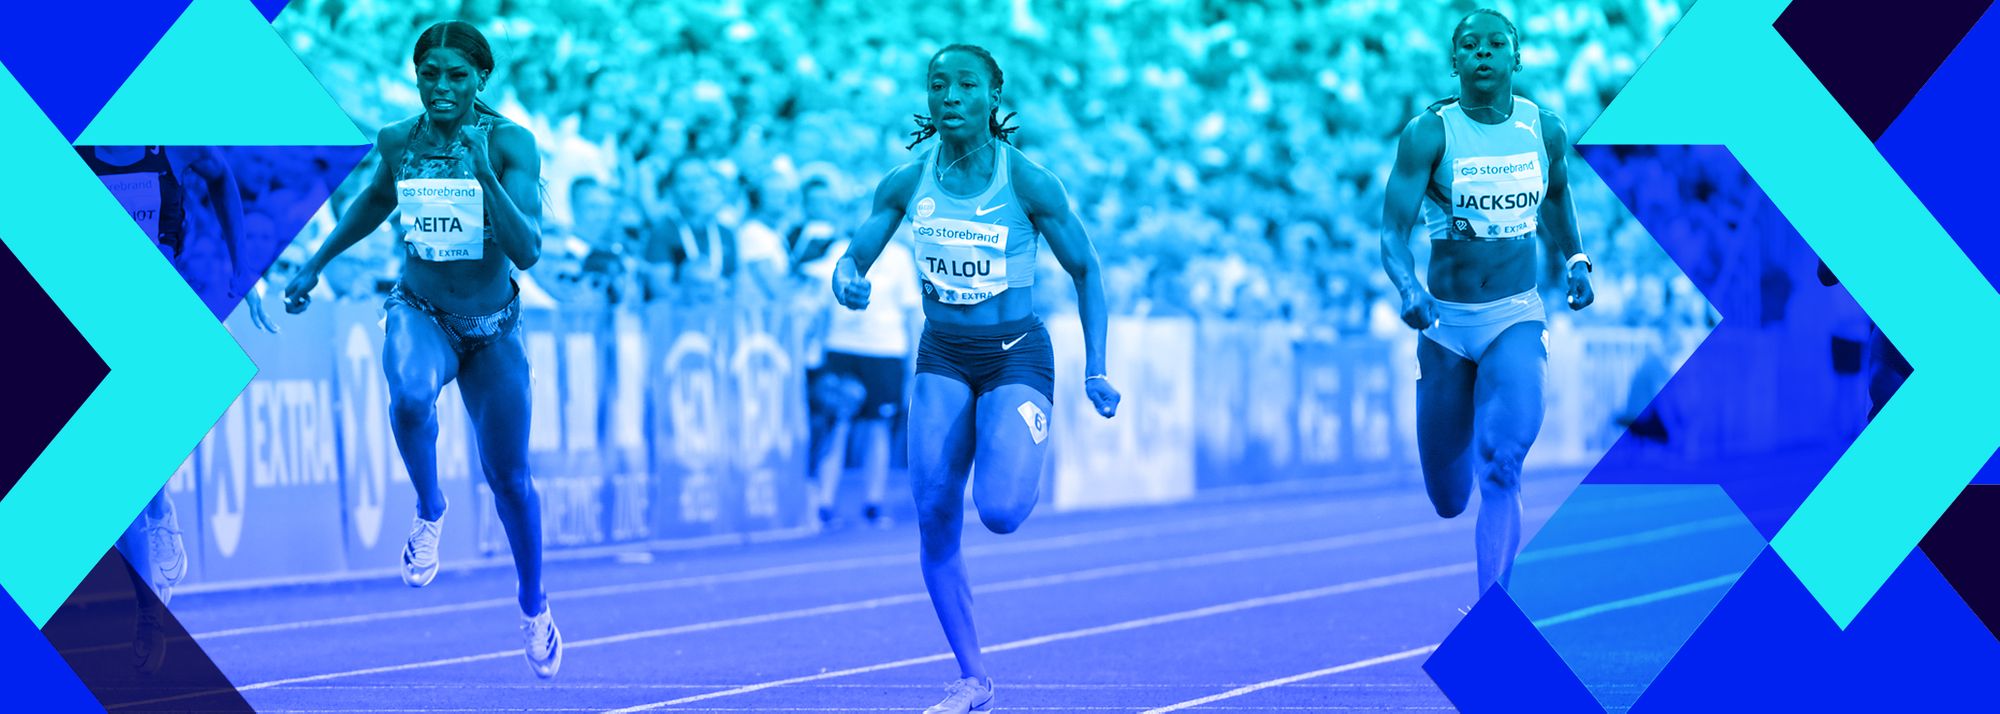 The Wanda Diamond League continues on Thursday (30) in Oslo with the sixth meeting of the season